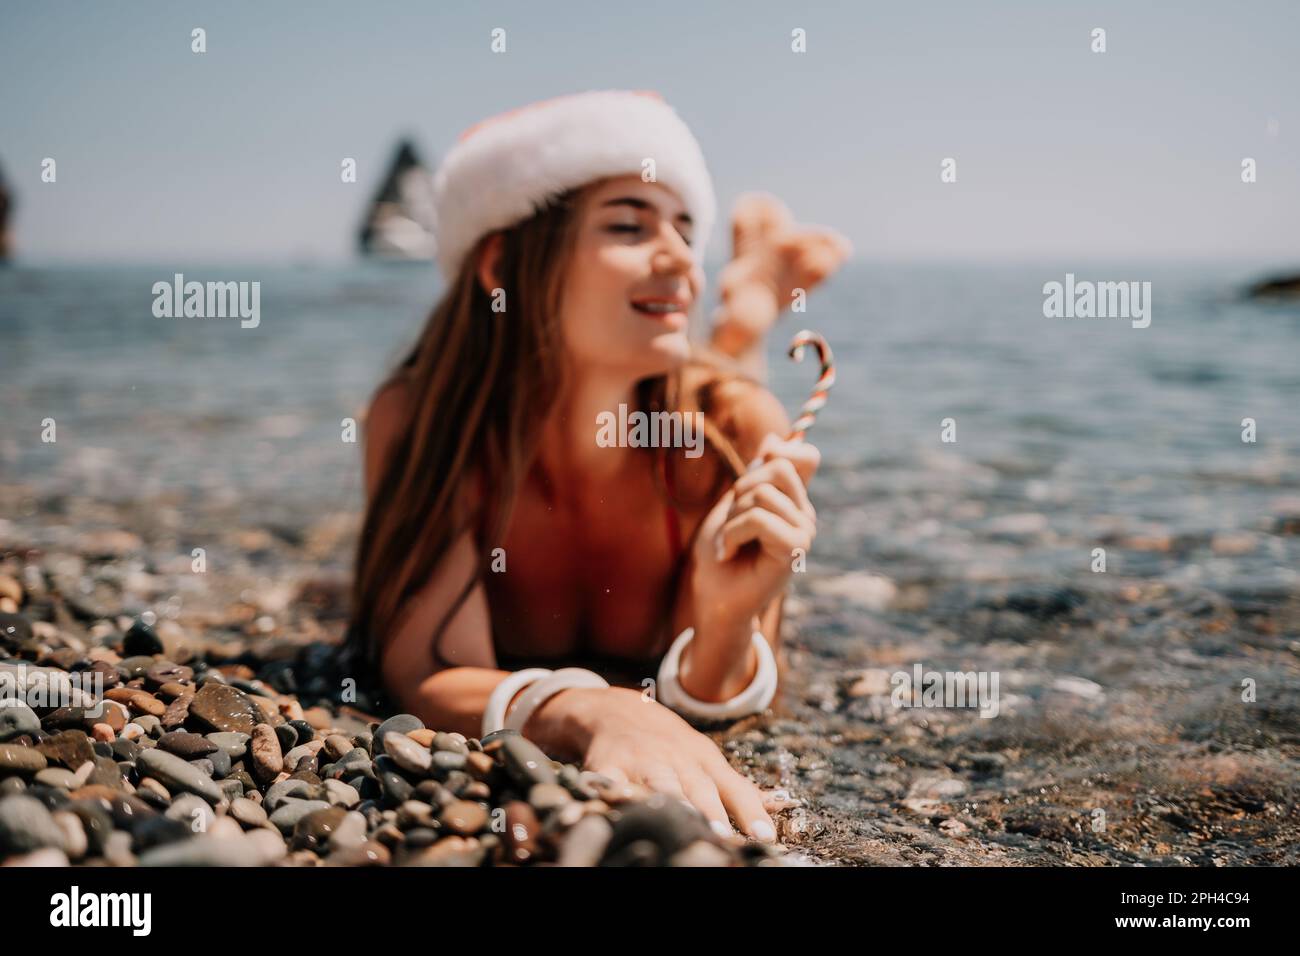 Woman travel sea. Happy tourist enjoy taking picture on the beach for memories. Woman traveler in Santa hat looks at camera on the sea bay, sharing Stock Photo